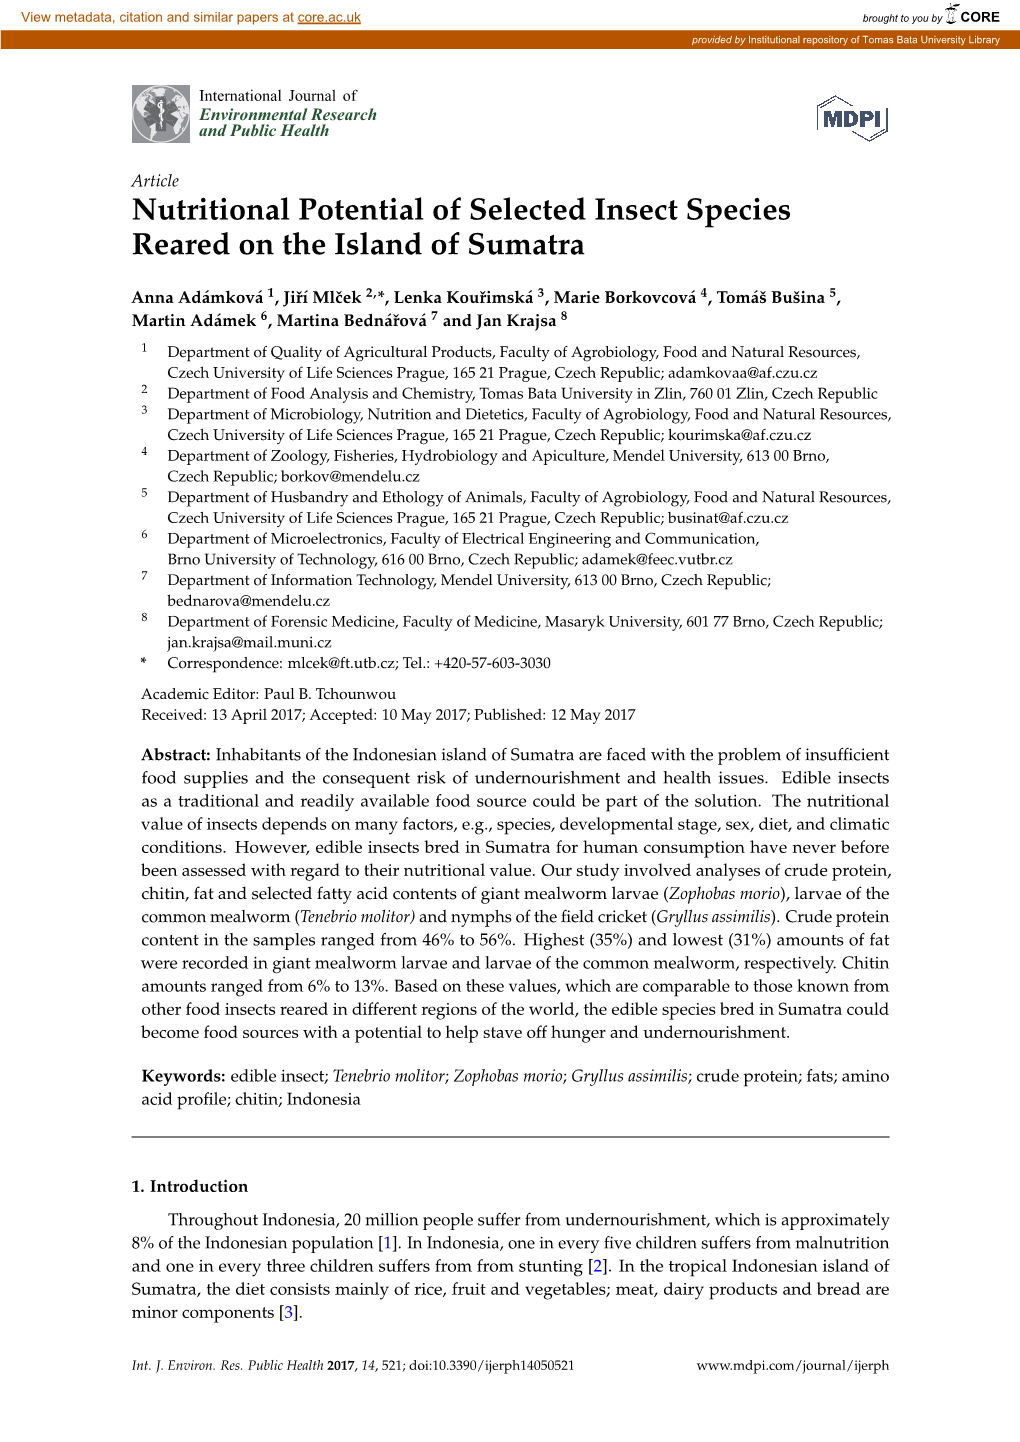 Nutritional Potential of Selected Insect Species Reared on the Island of Sumatra